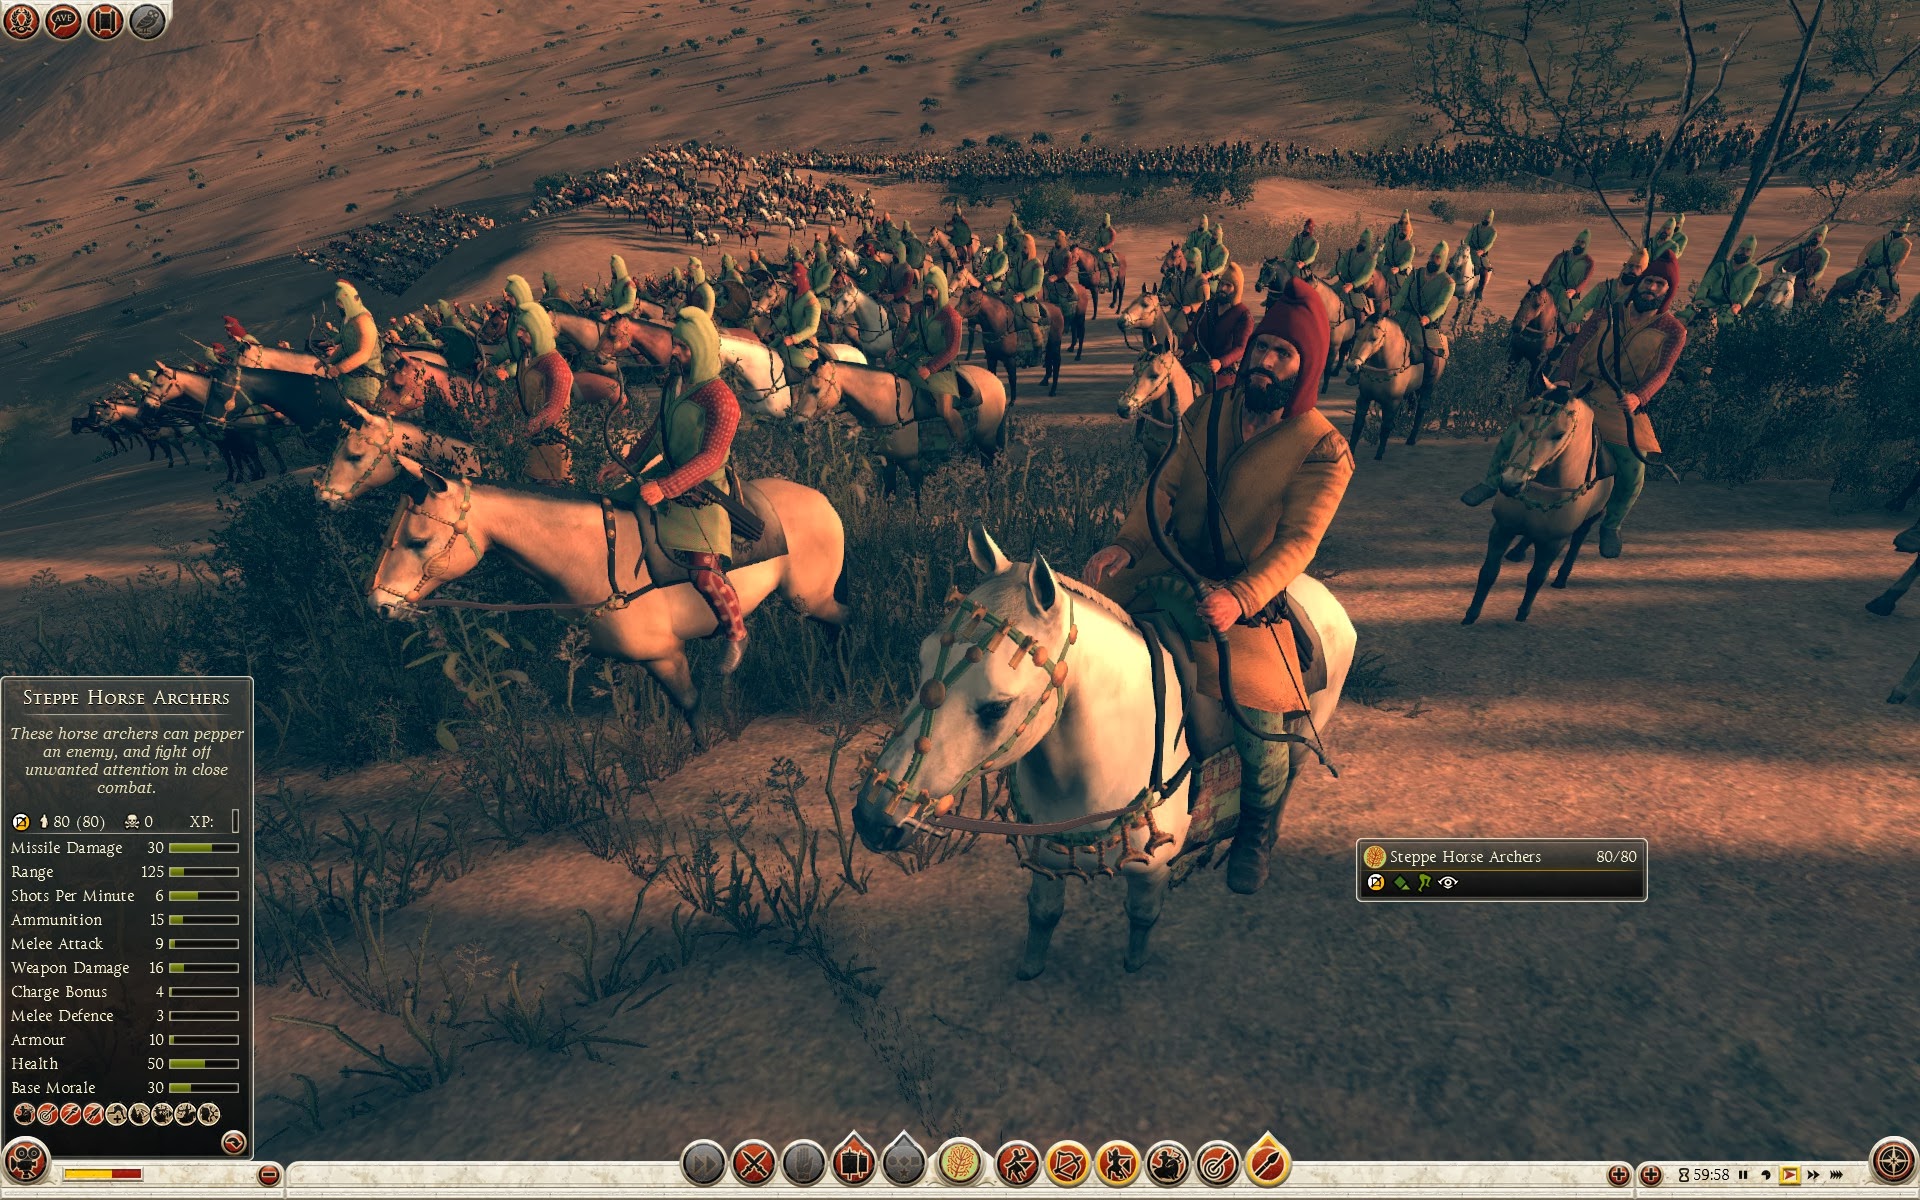 Steppe Horse Archers